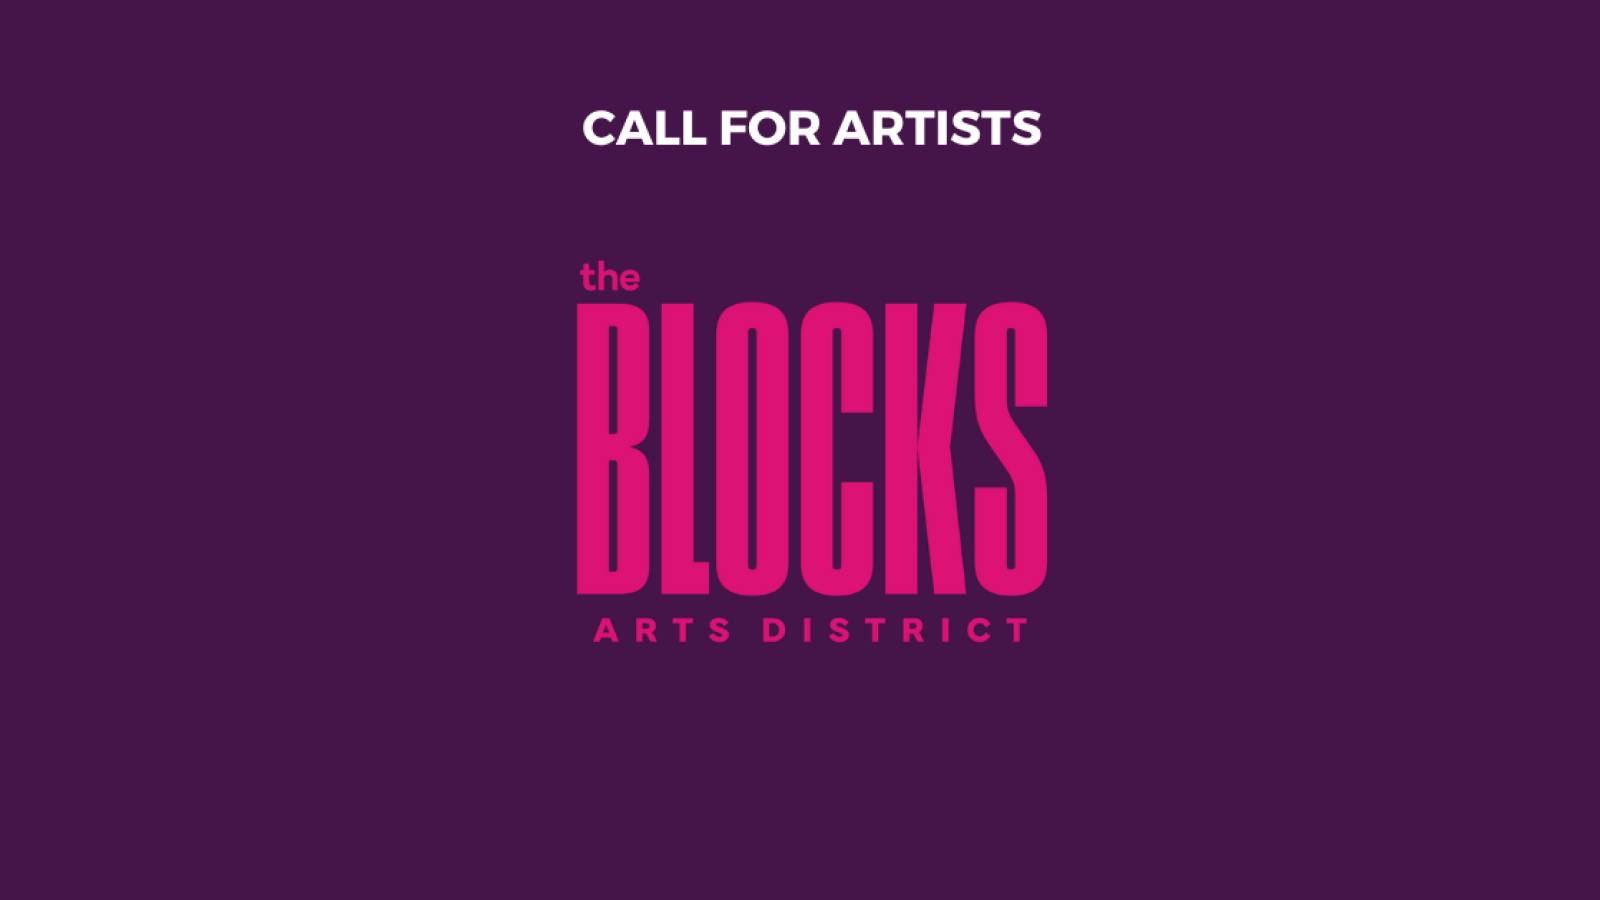 CALL FOR ARTISTS!